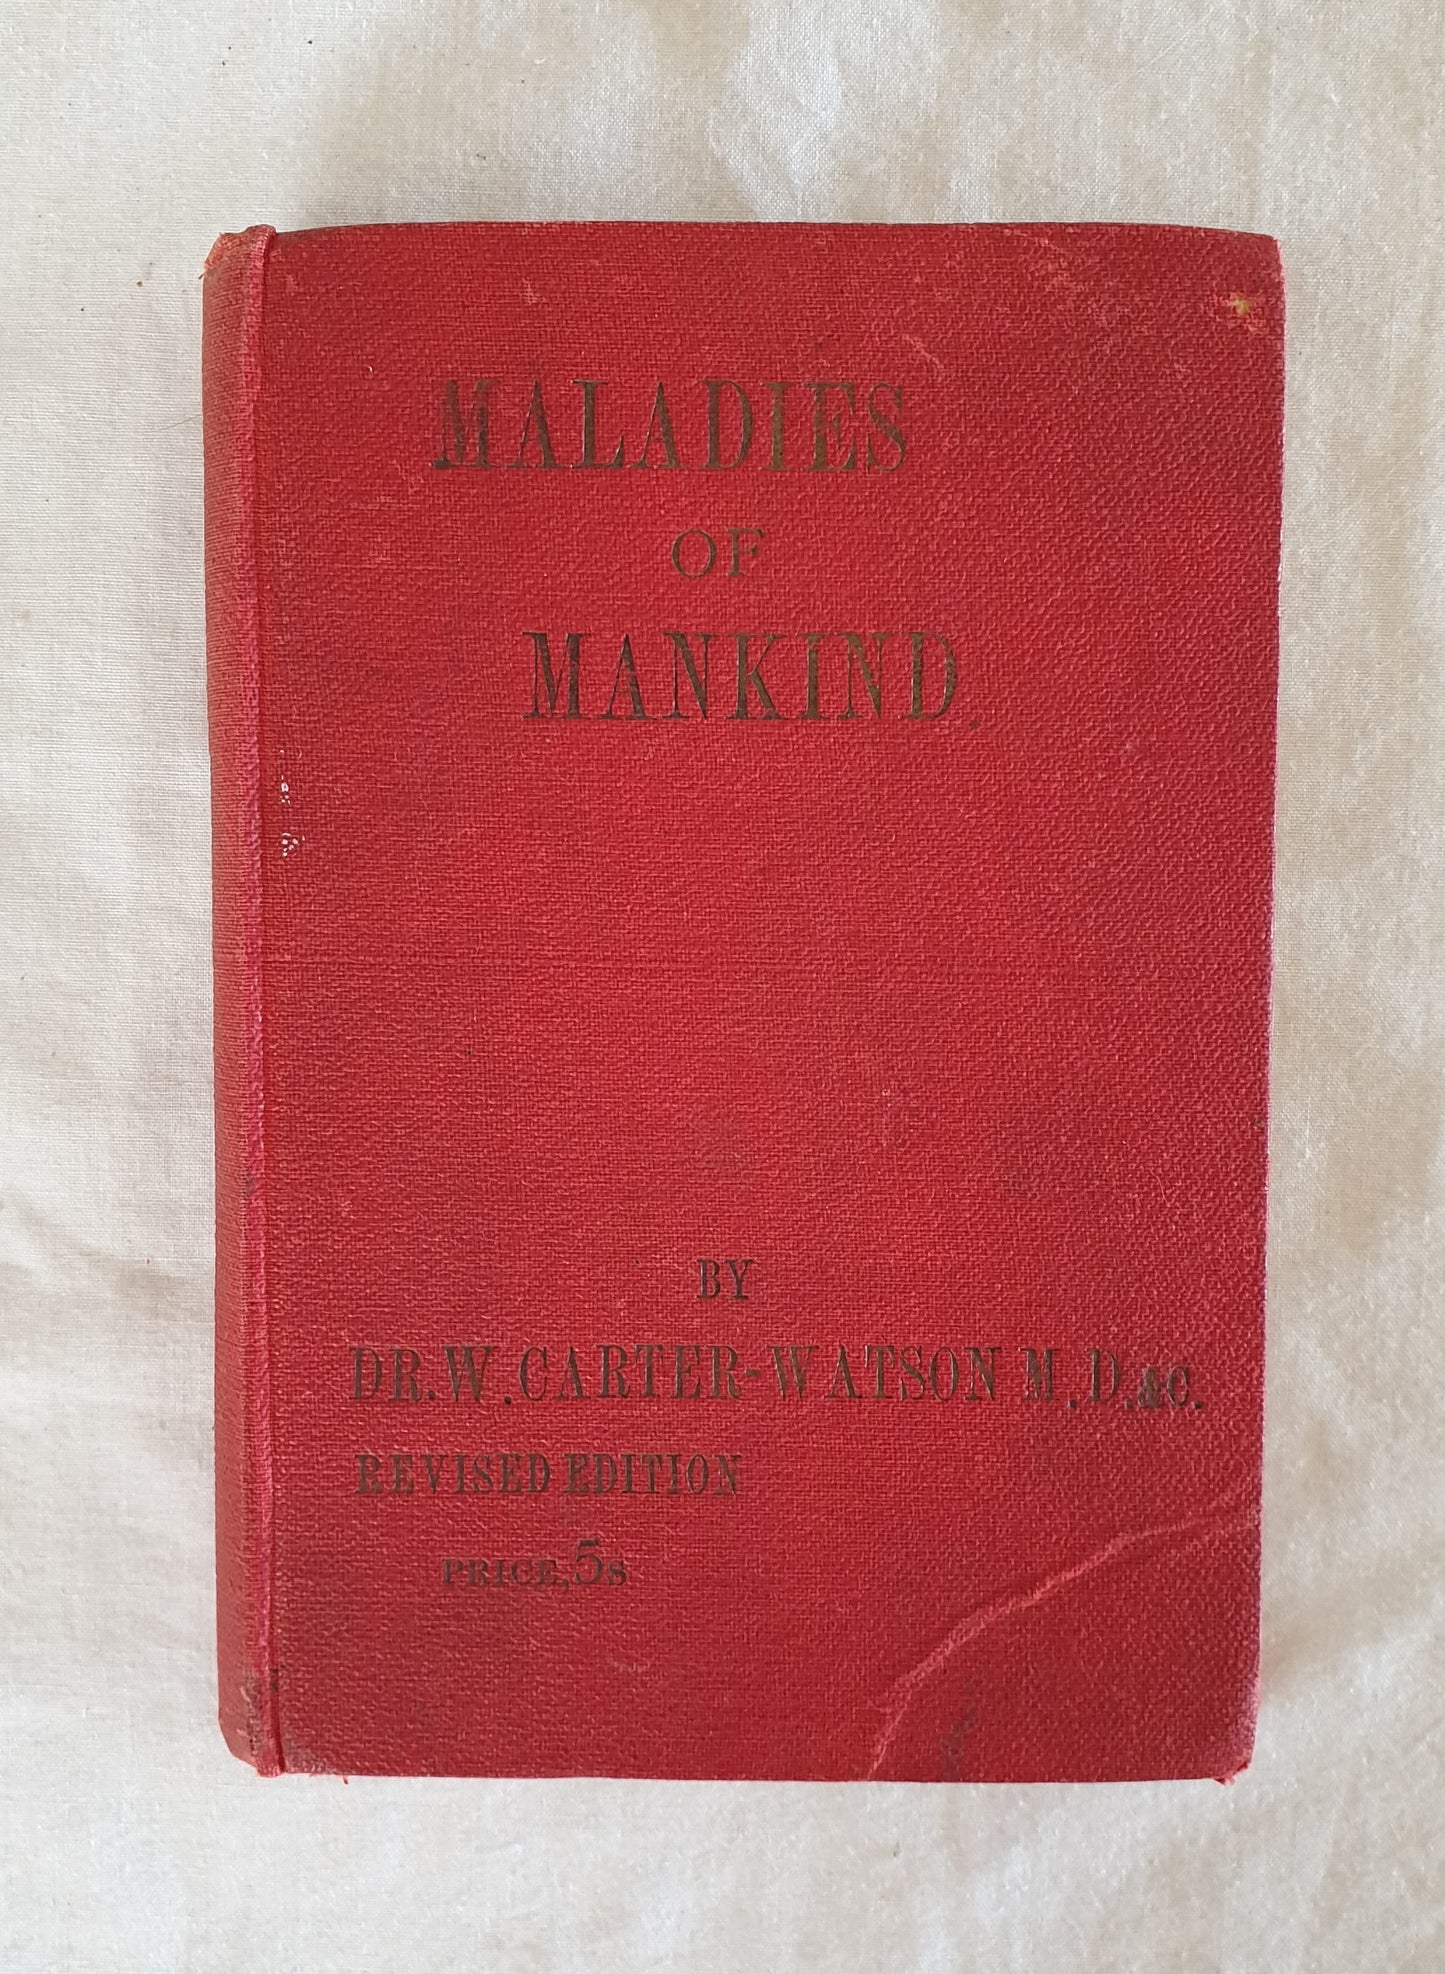 Maladies of Mankind by Dr. Walter Carter Watson